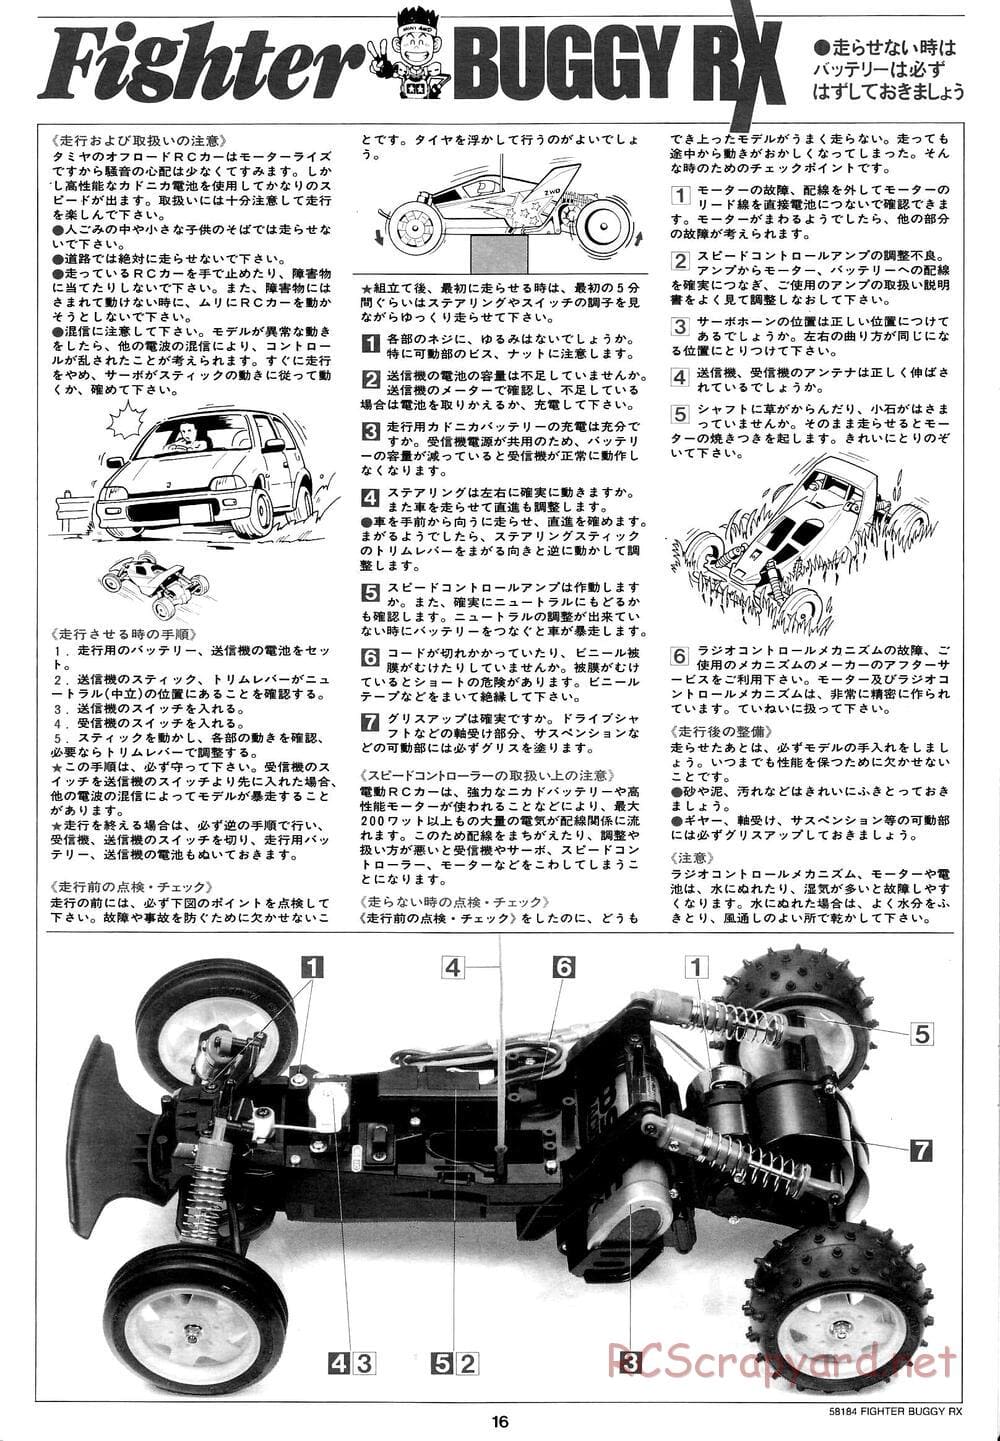 Tamiya - Fighter Buggy RX Chassis - Manual - Page 16